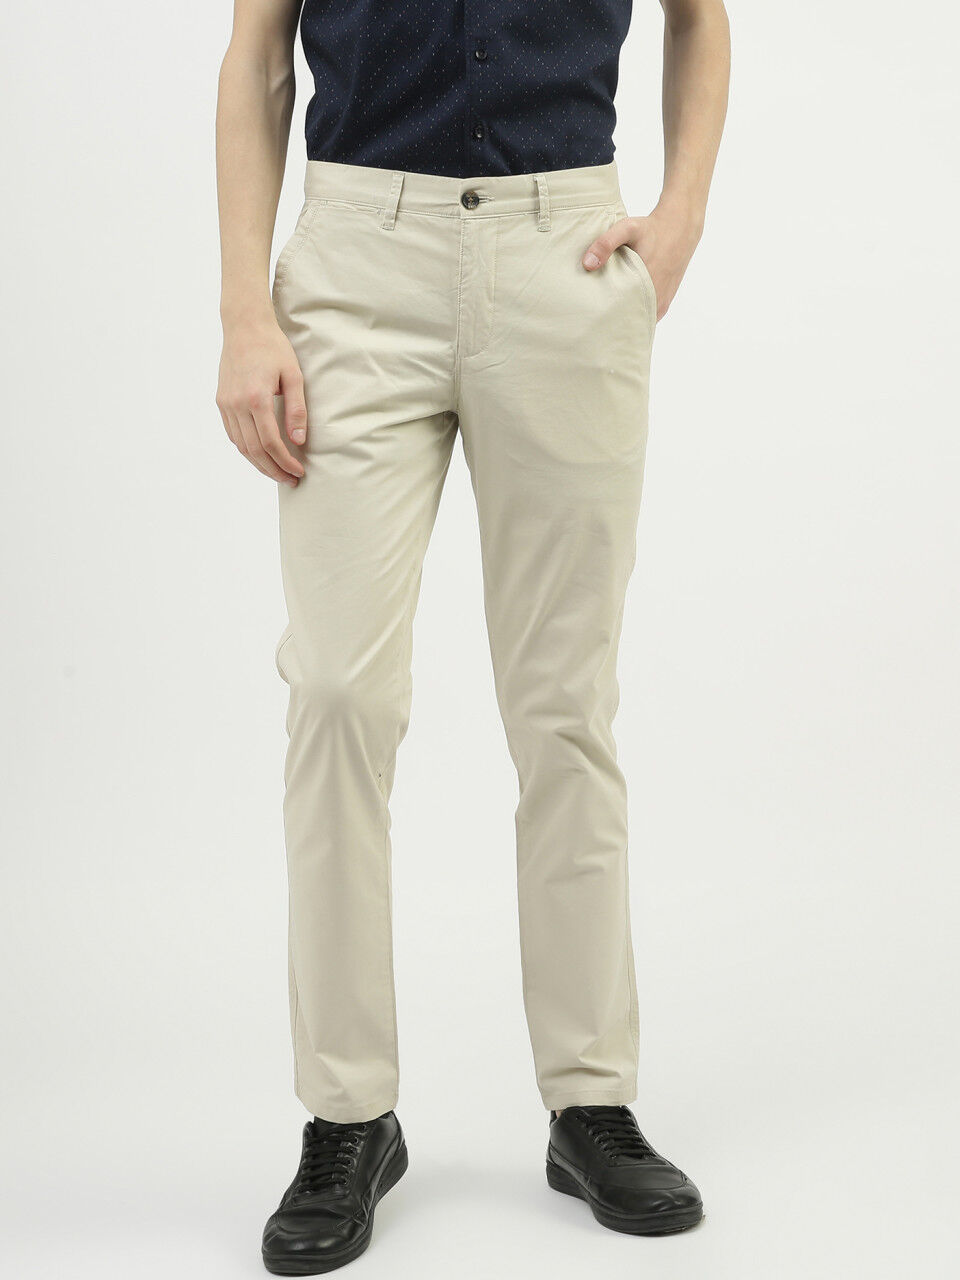 Slim pants UNITED COLOR OF BENETTON White size 40 IT in Cotton - 17137257